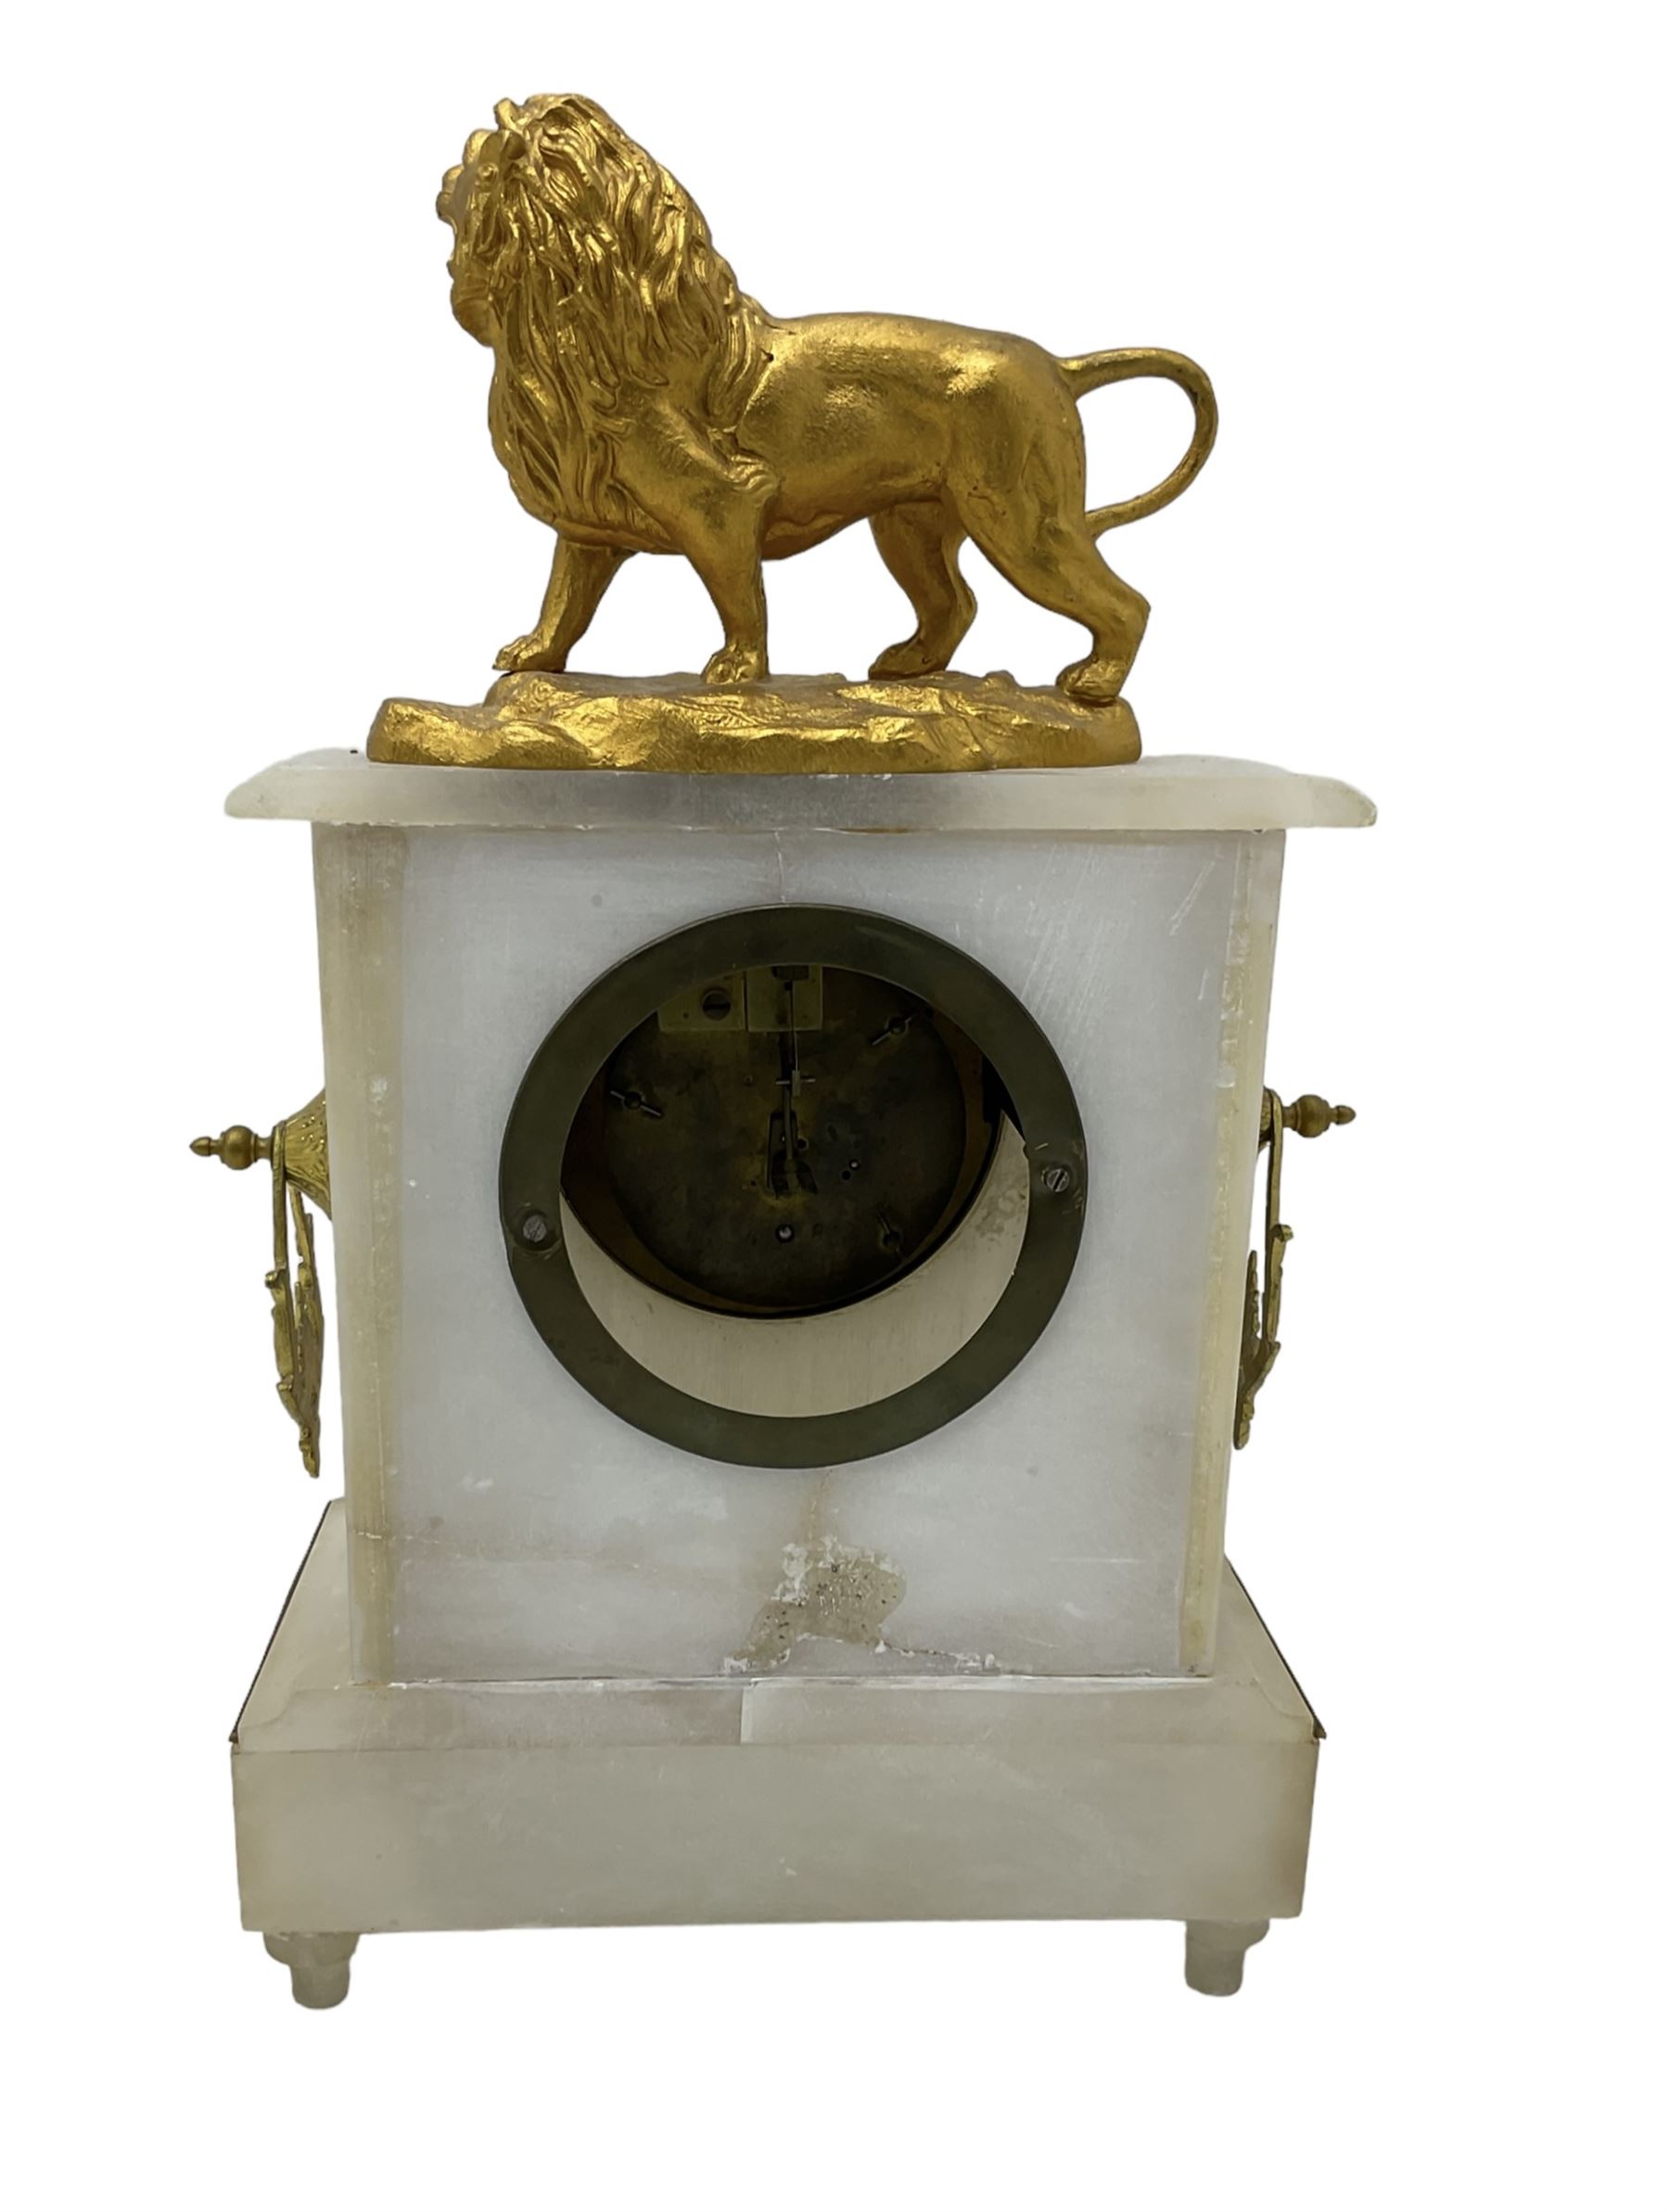 French - mid 19th century 8-day mantle clock in an alabaster case with a flat top surmounted by a gi - Image 3 of 4